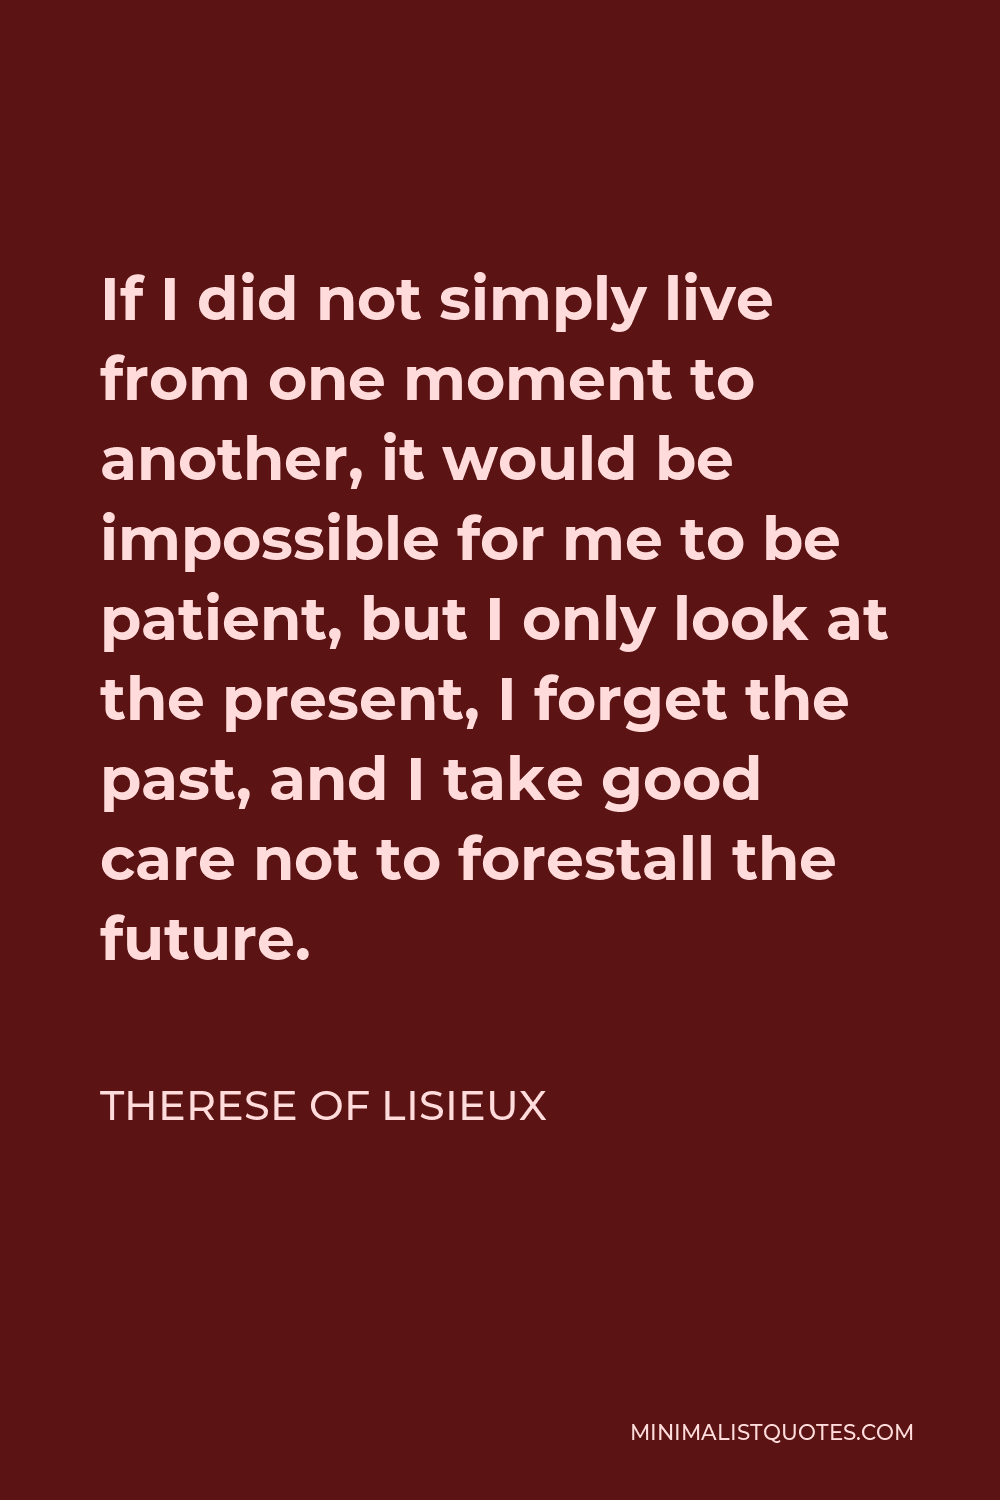 Therese of Lisieux Quote - If I did not simply live from one moment to another, it would be impossible for me to be patient, but I only look at the present, I forget the past, and I take good care not to forestall the future.